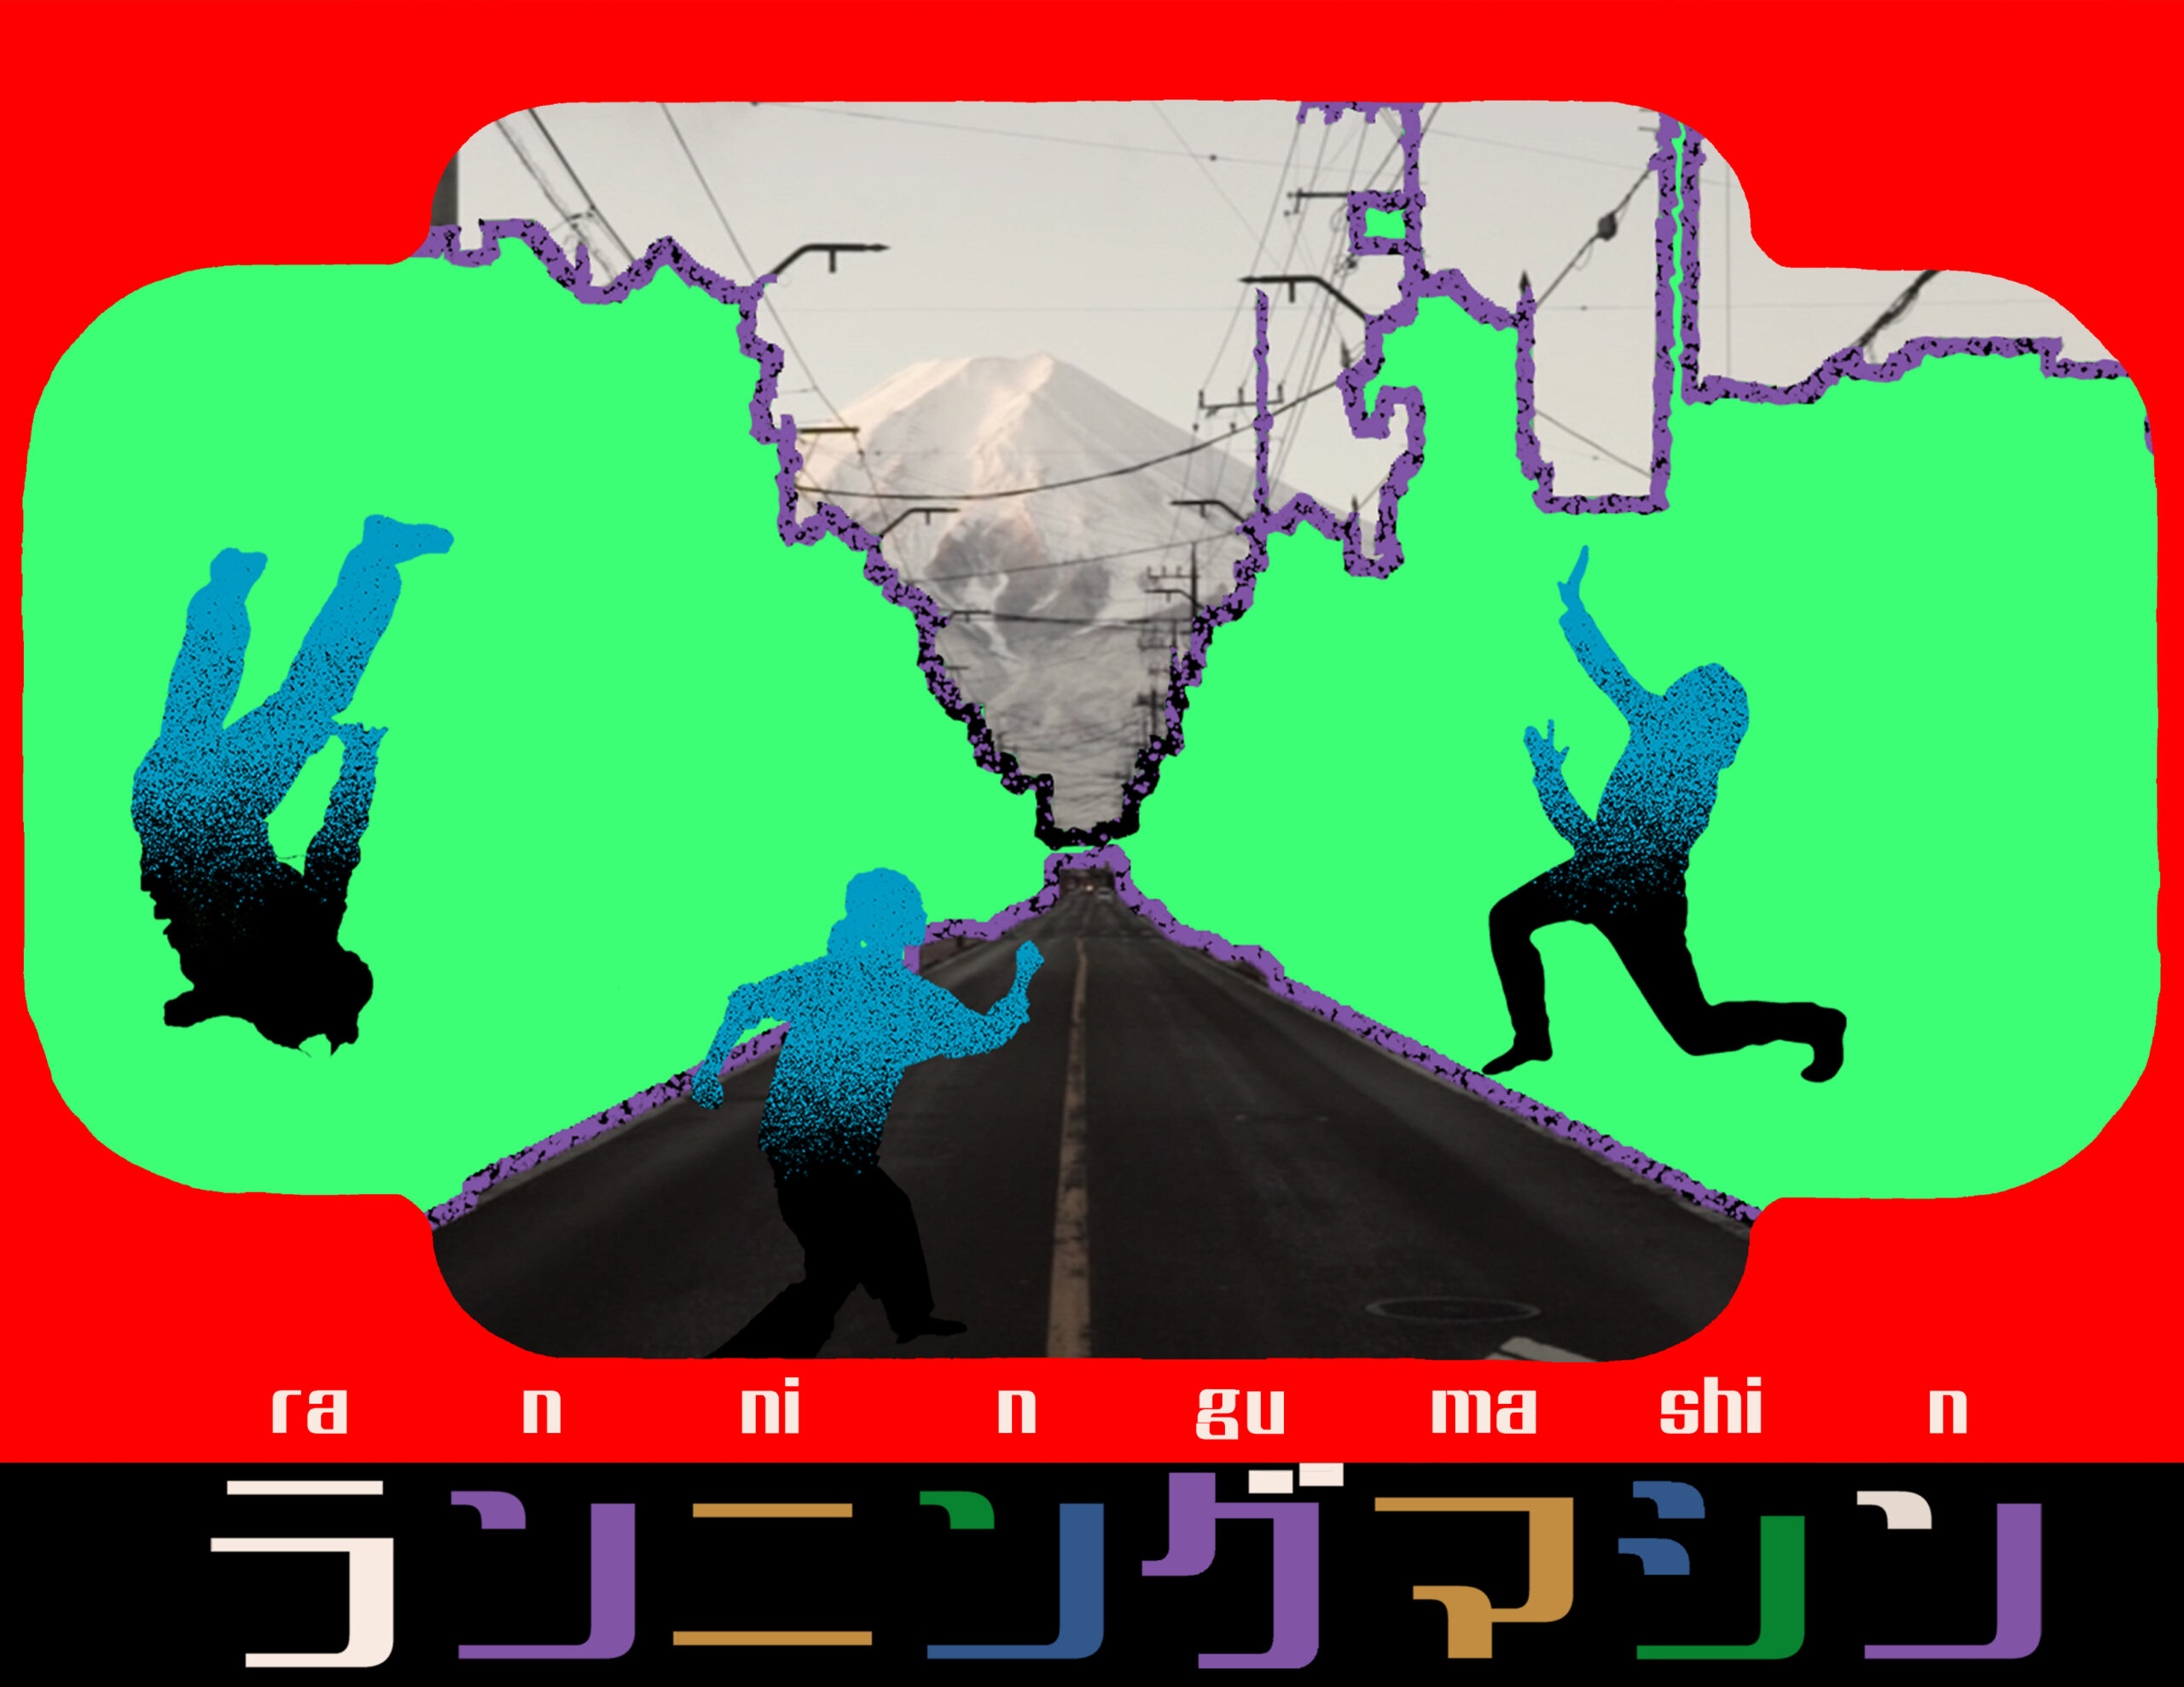 three dancing figures appear on a background of Chromakey green with a snow covered mountain between them and the title of the work Running Machine written in Japanese Kanji